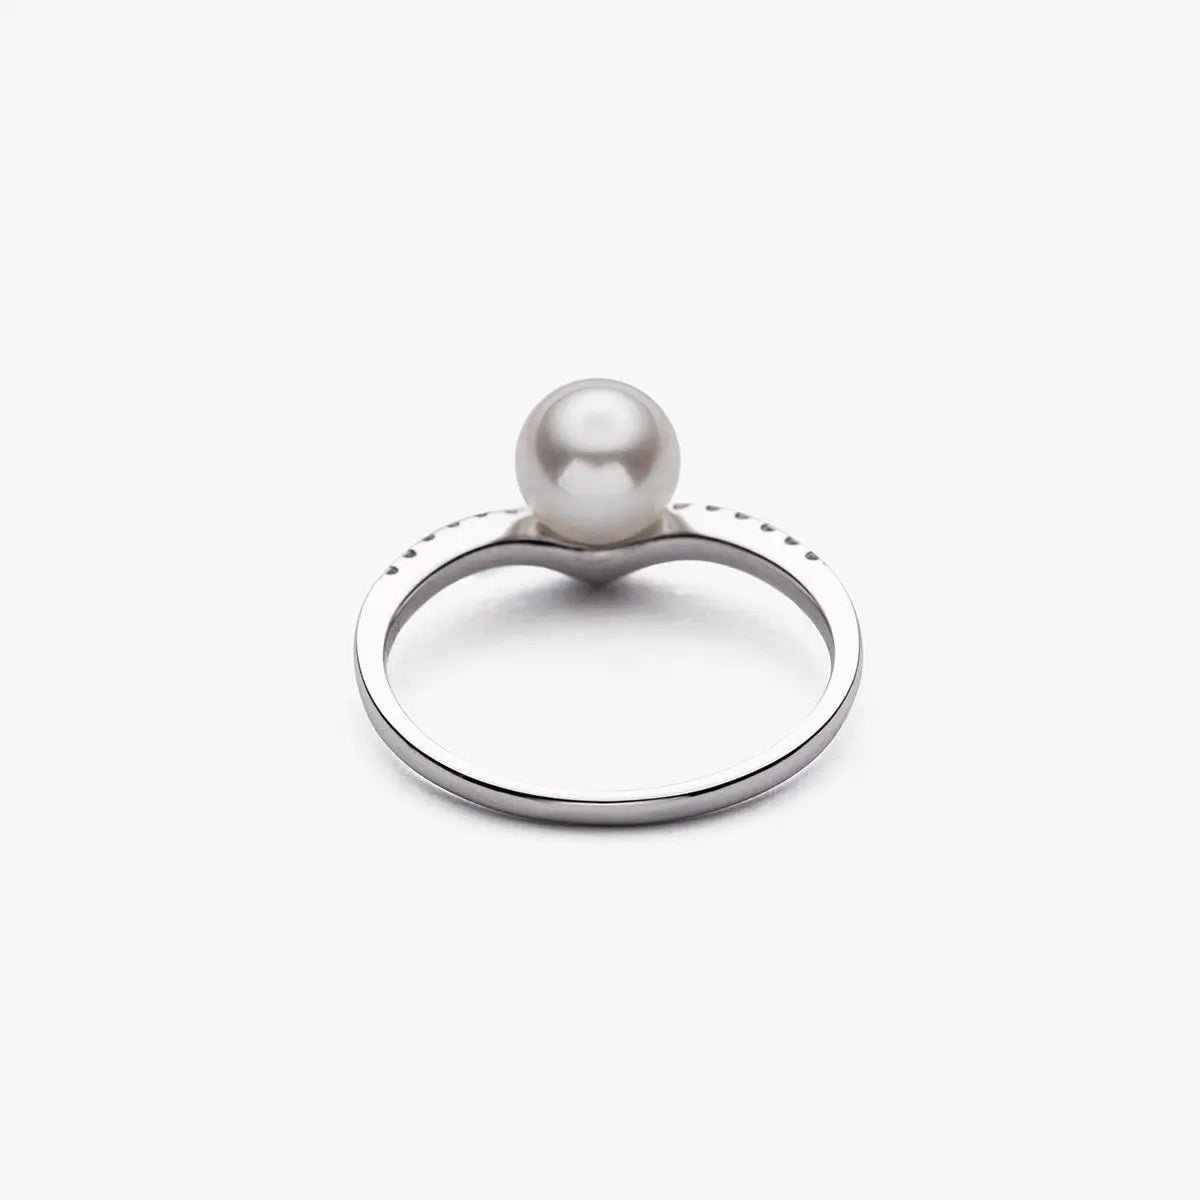 Protea Akoya White Pearl Ring in Gold with Diamonds - 8mm